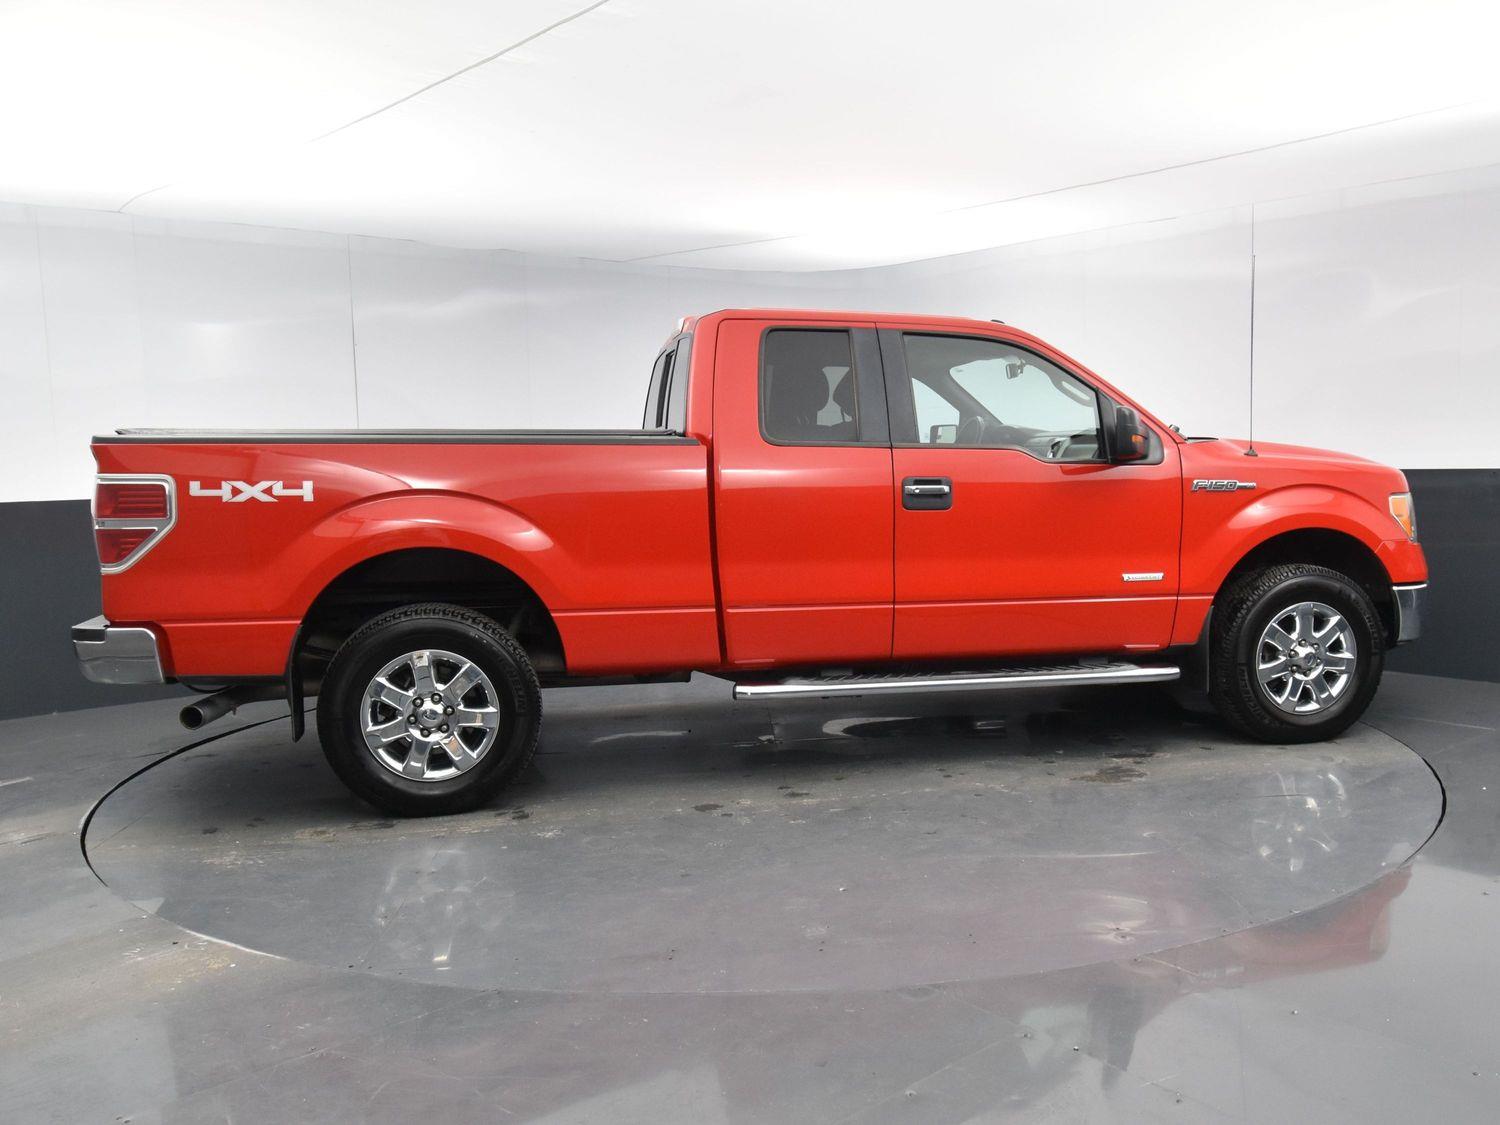 Used 2013 Ford F-150 XLT Extended Cab Truck for sale in Grand Island NE